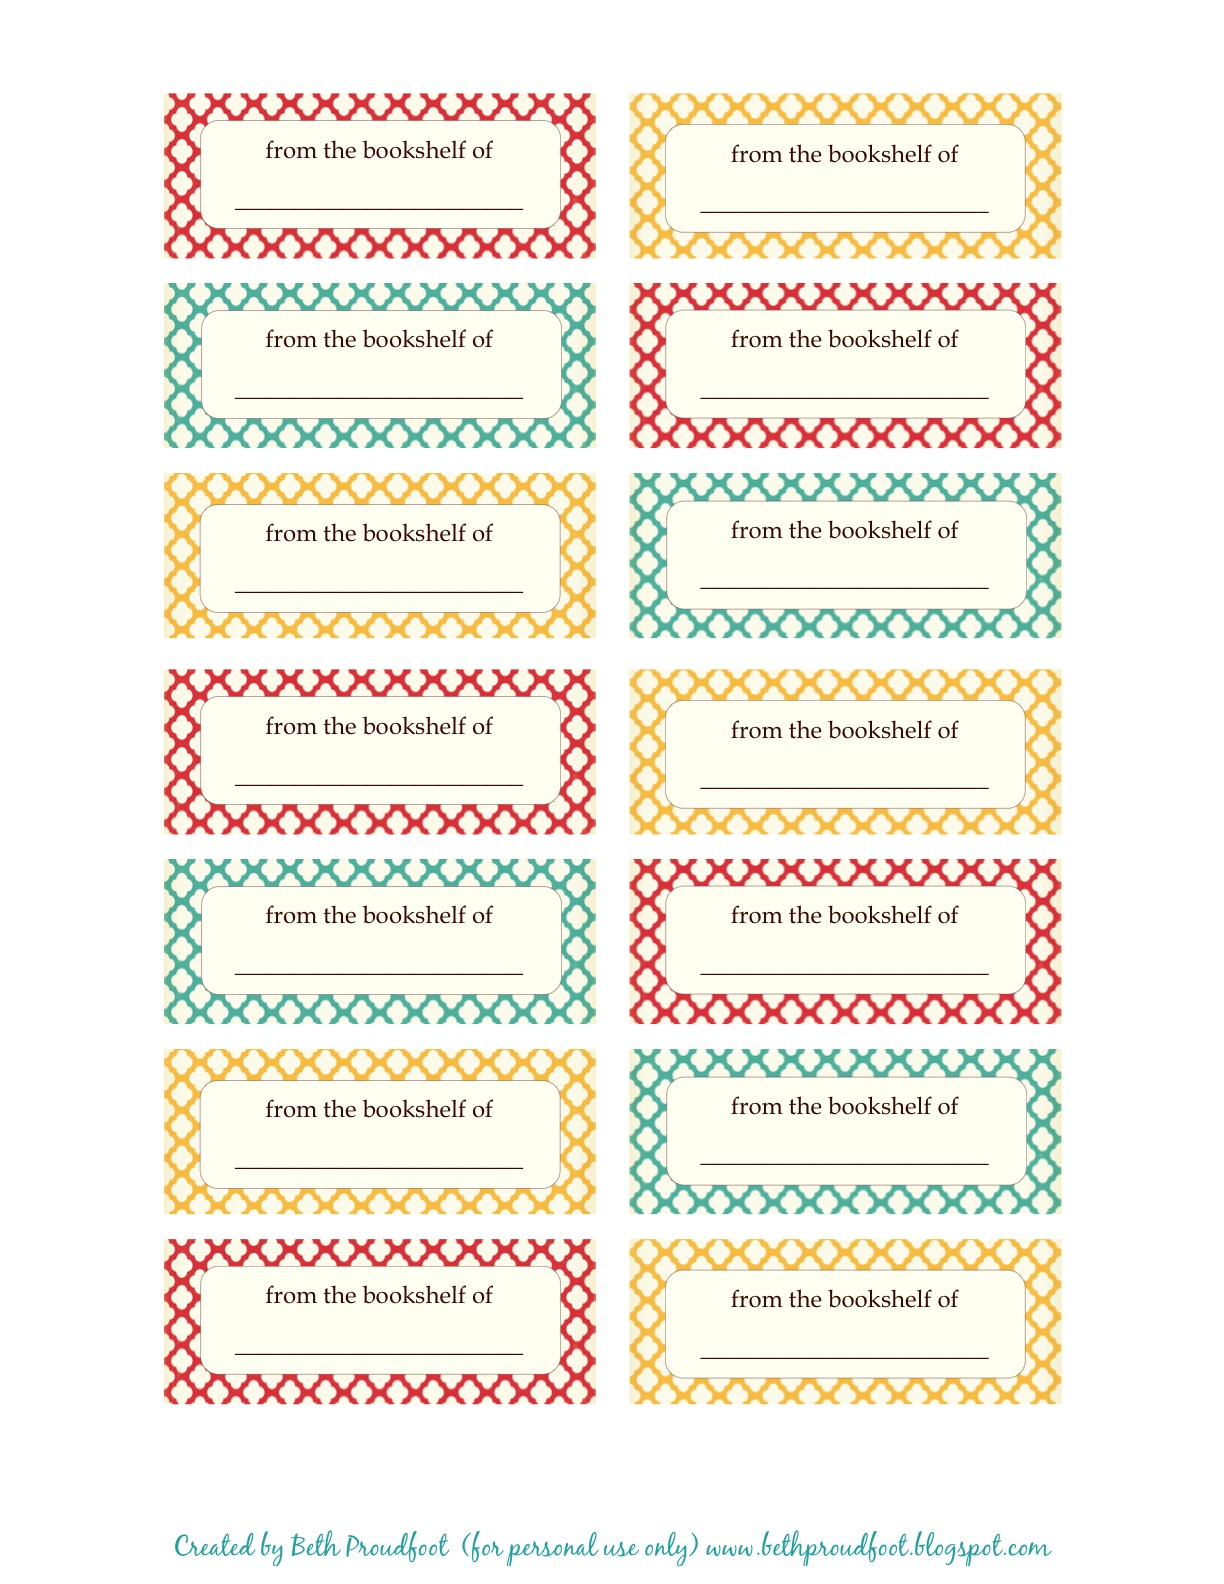 The Prudent Pantry Free Printable Book Labels